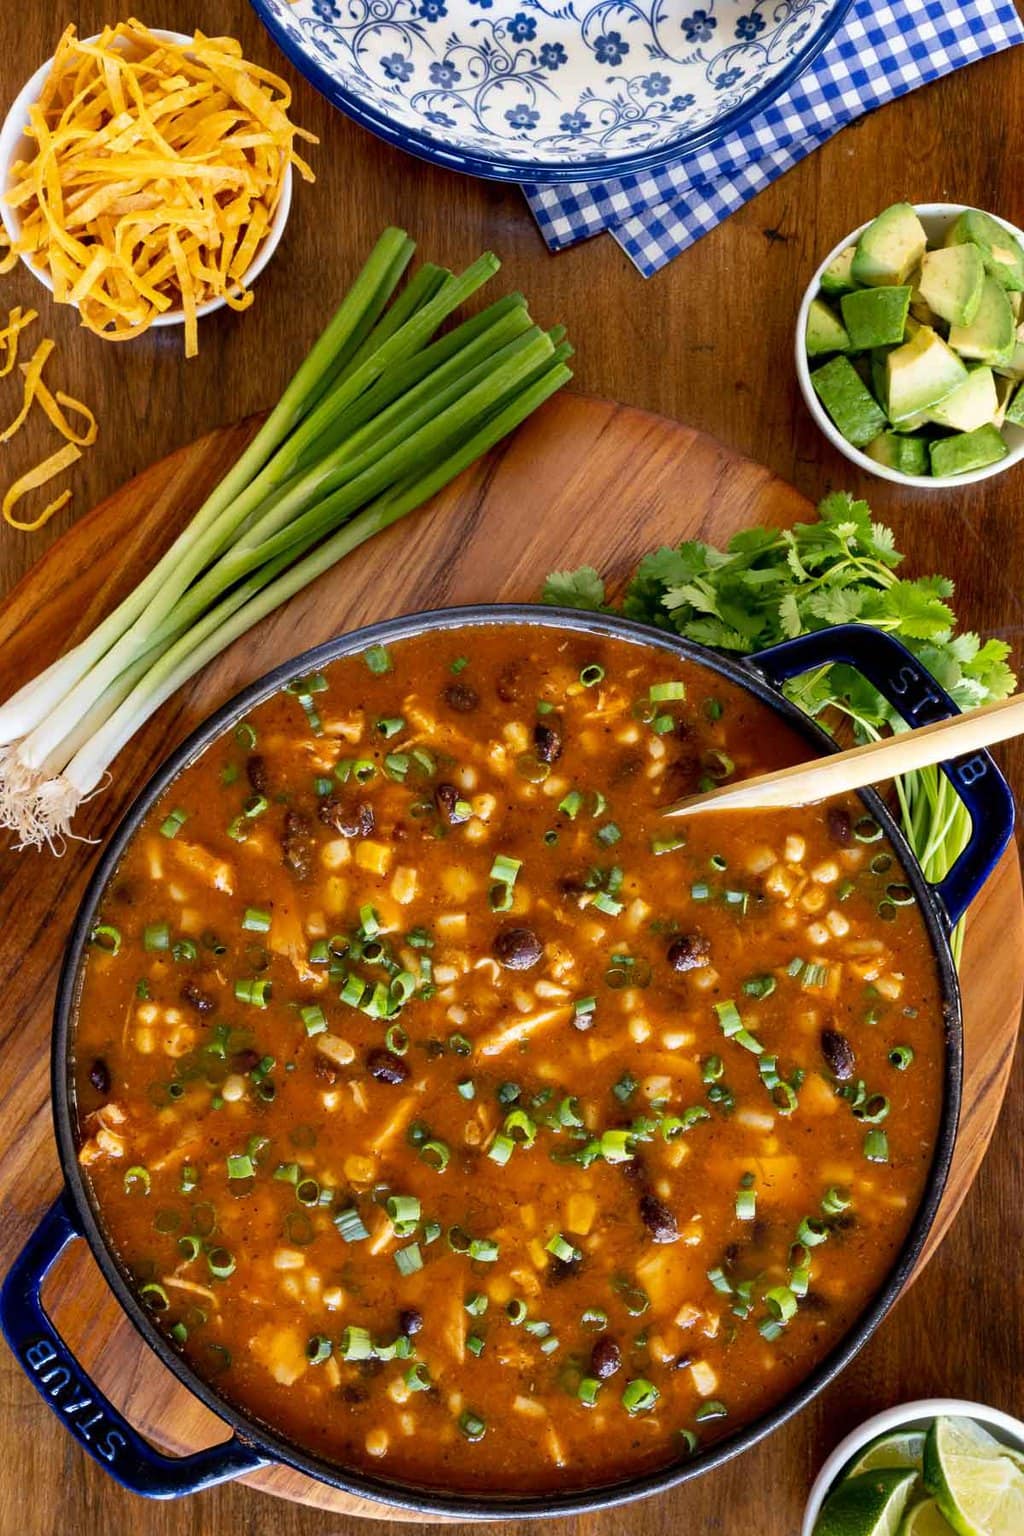 Overhead vertical photo of a pot of Southwestern Black Bean Chicken Tortilla Soup surrounded by fresh vegetables, diced avocados, cilantro and baked tortilla strips.